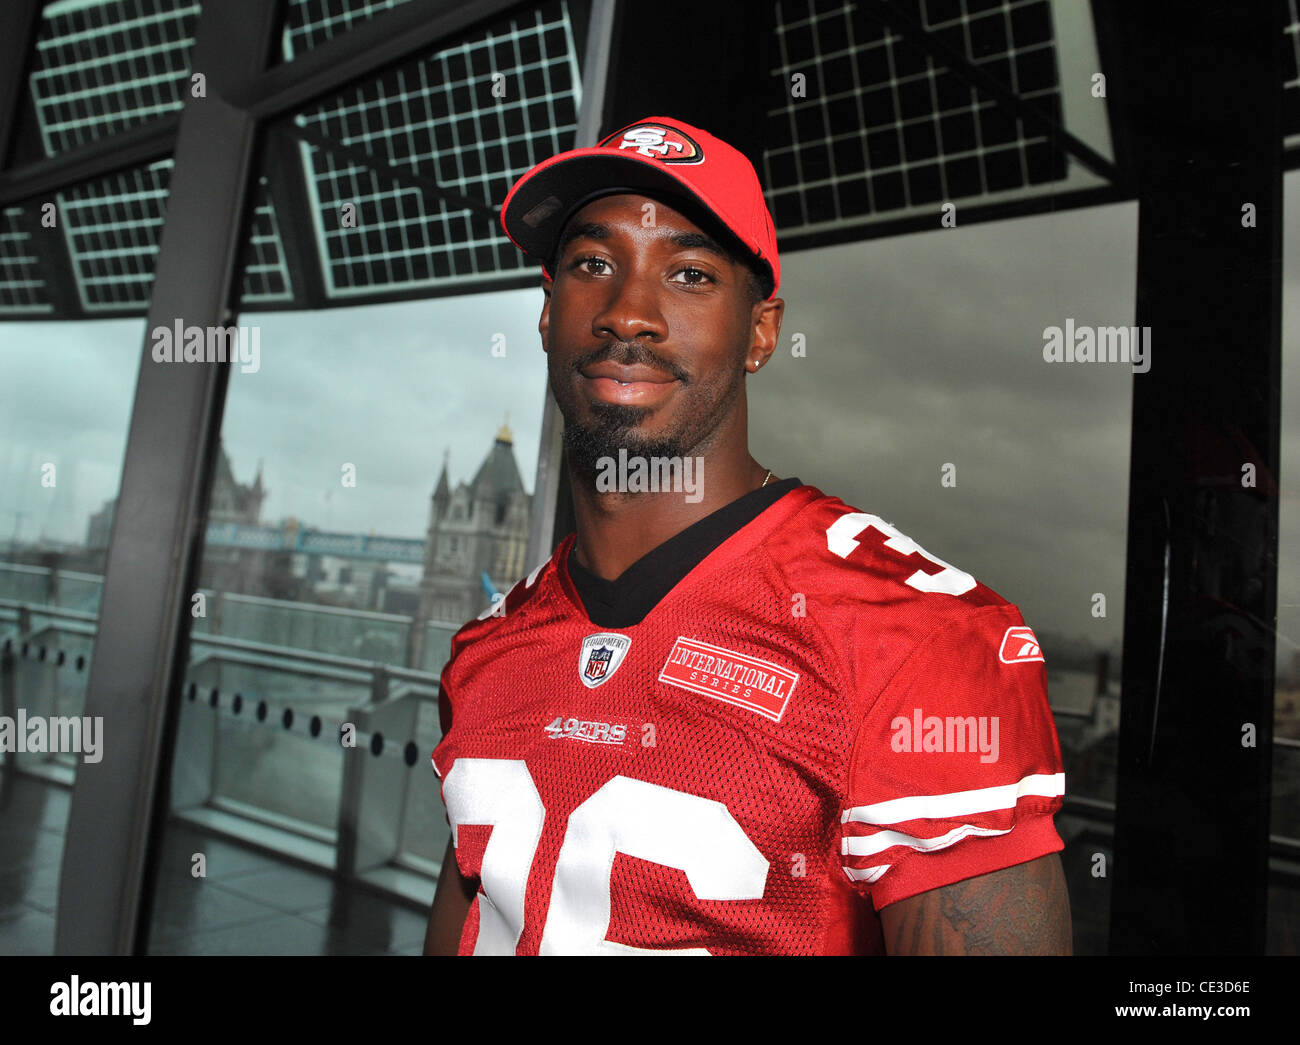 Shawntae Spencer San Francisco 49ers - photocall held at Potters Field Park. London Mayor meets members of the five-times SuperBowl champions ahead of their game against the Denver Broncos at Wembley Arena on the 31st of October. London, England - 26.10.1 Stock Photo